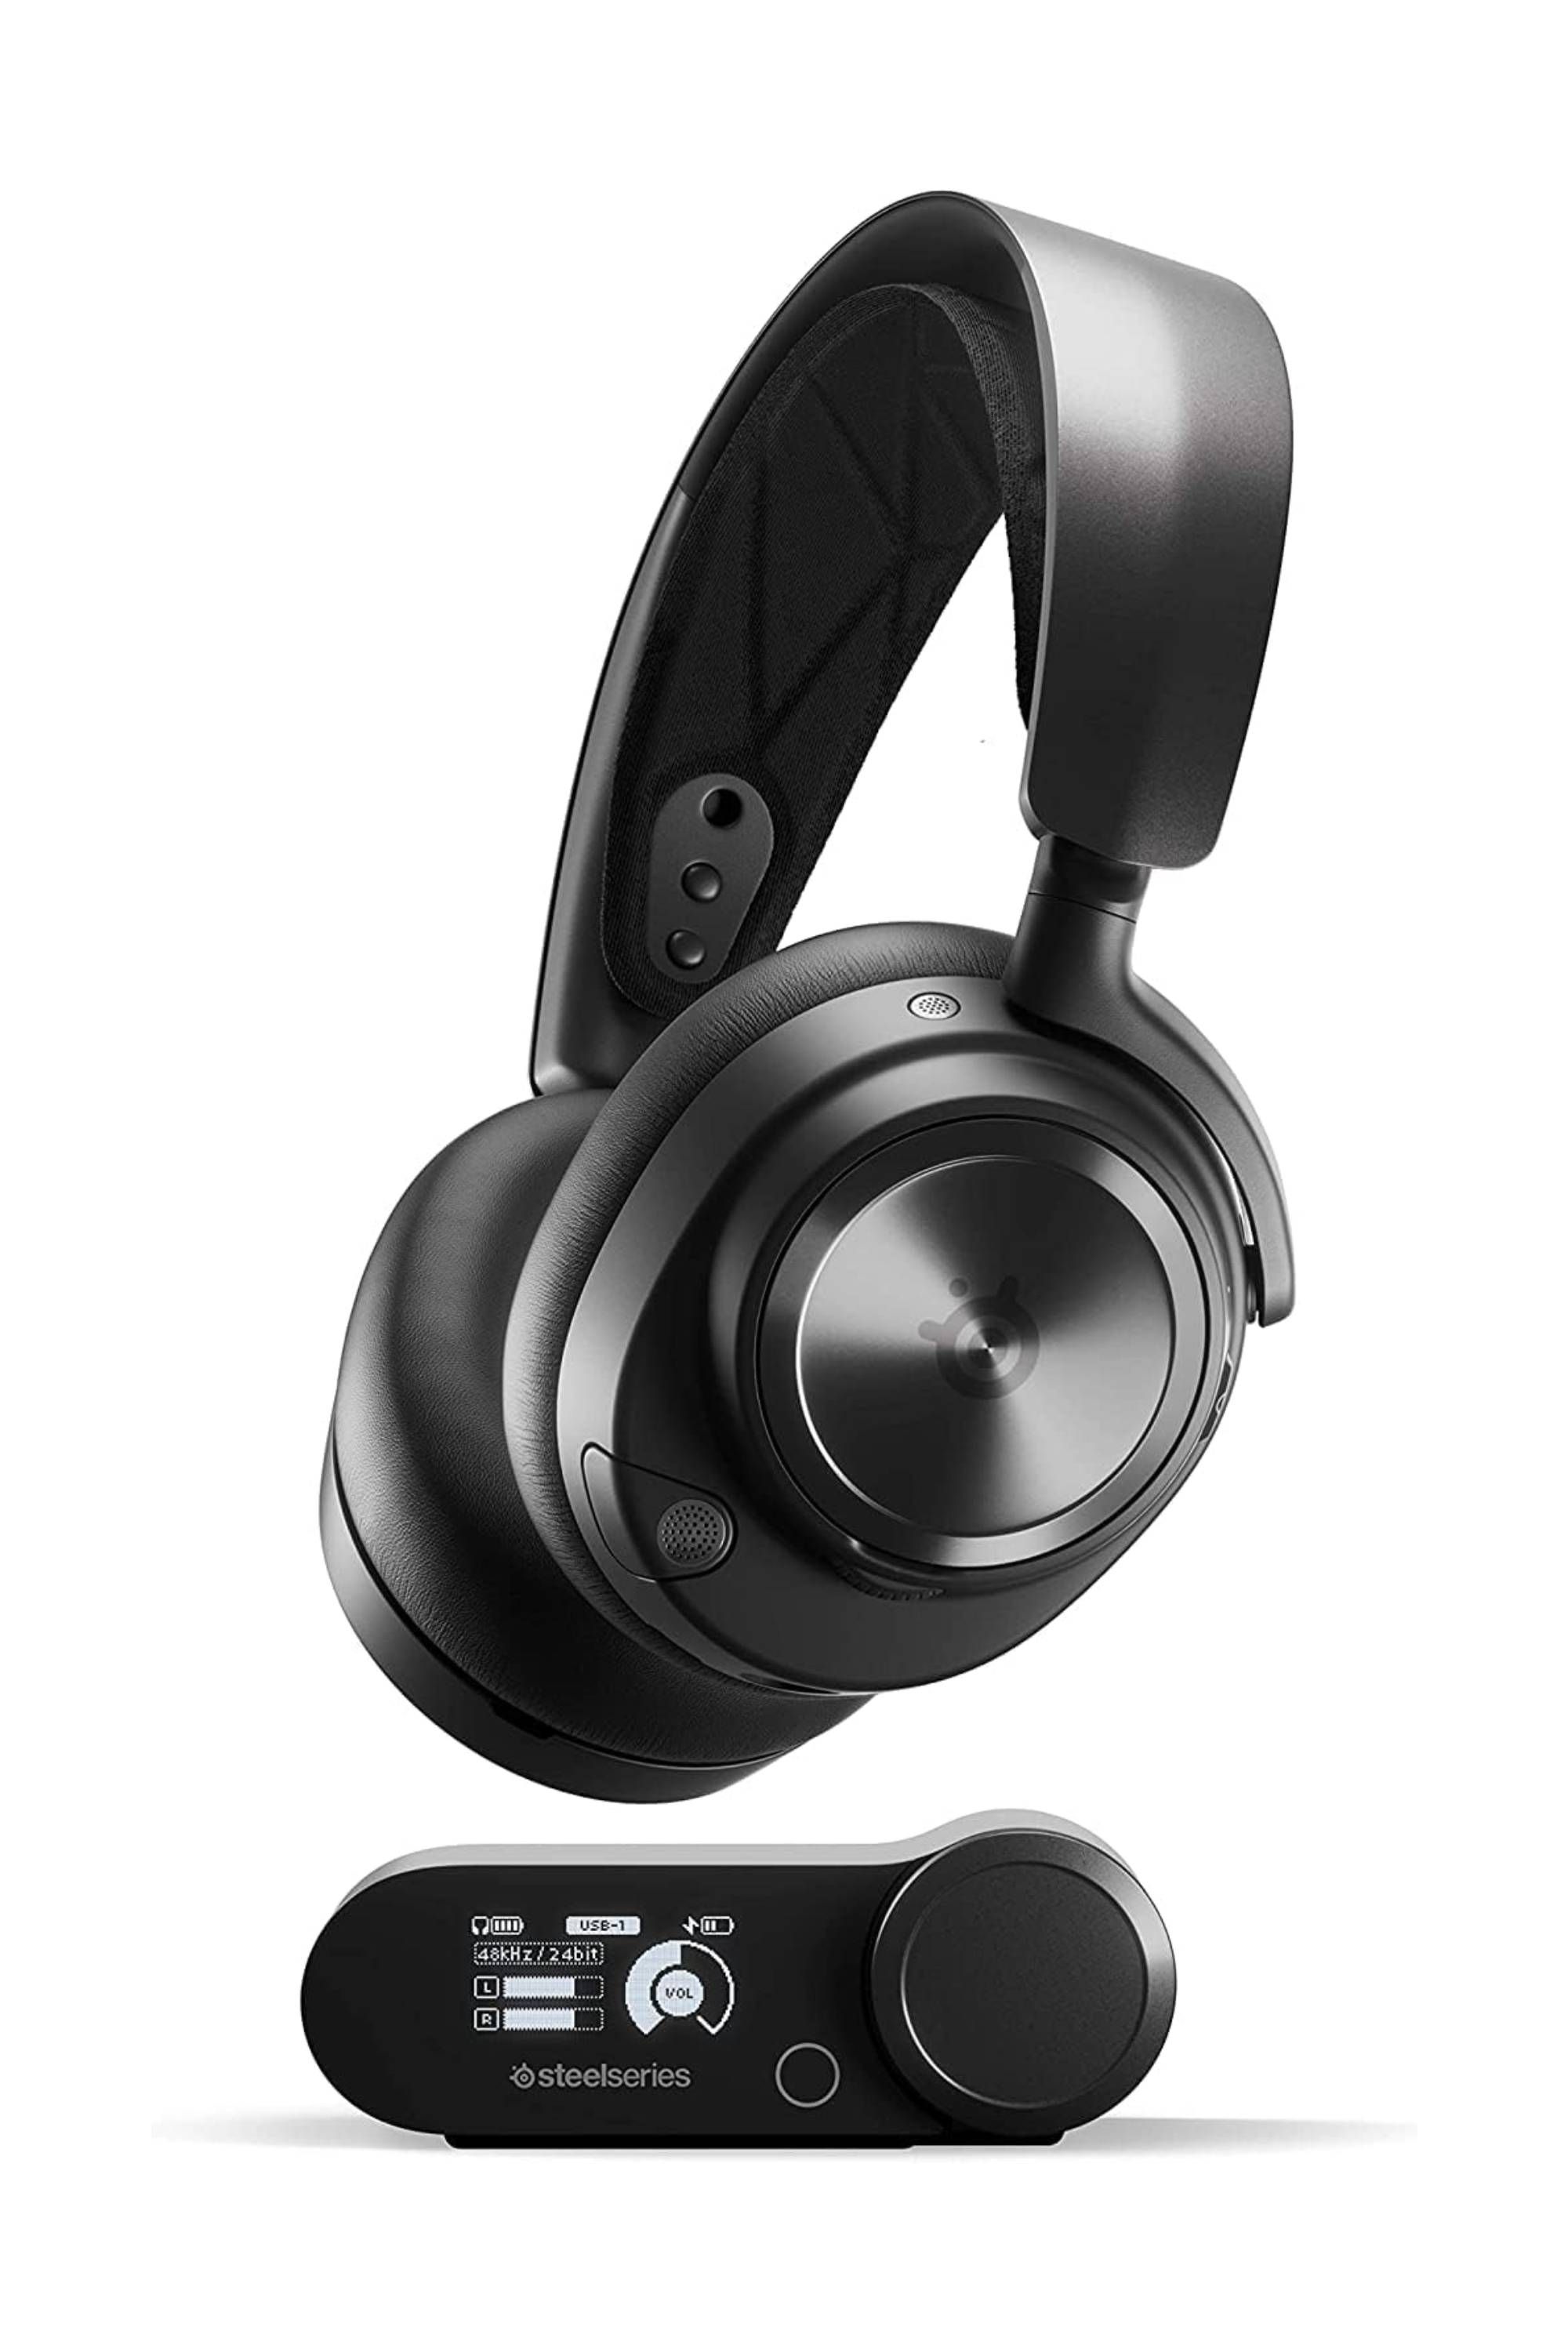 Best Headsets For Xbox Series X